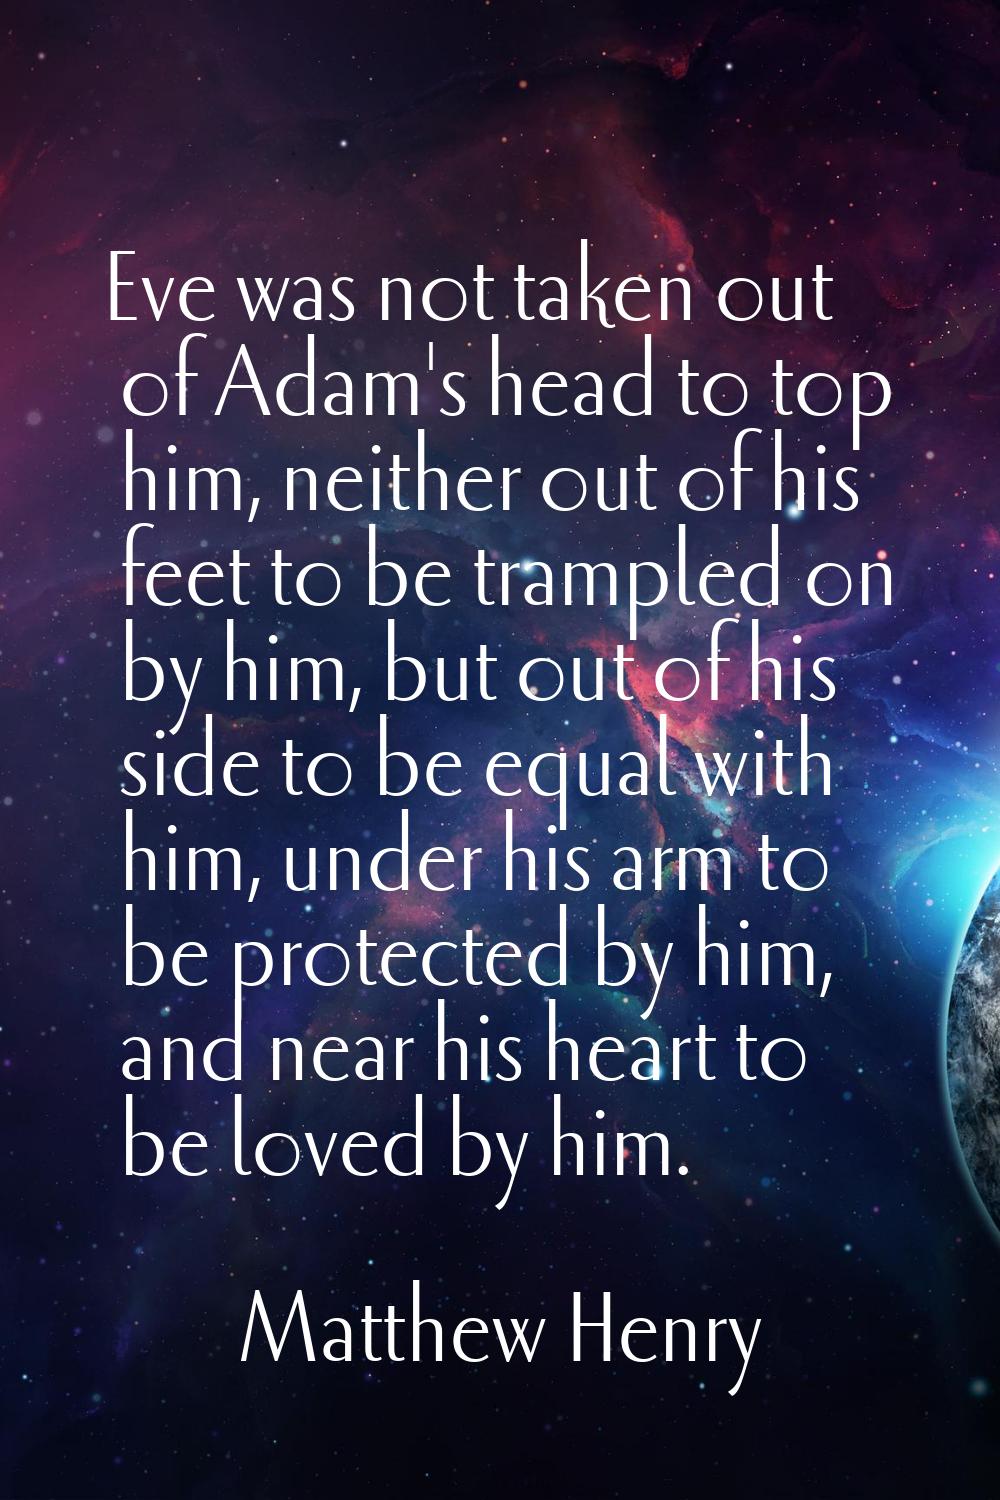 Eve was not taken out of Adam's head to top him, neither out of his feet to be trampled on by him, 